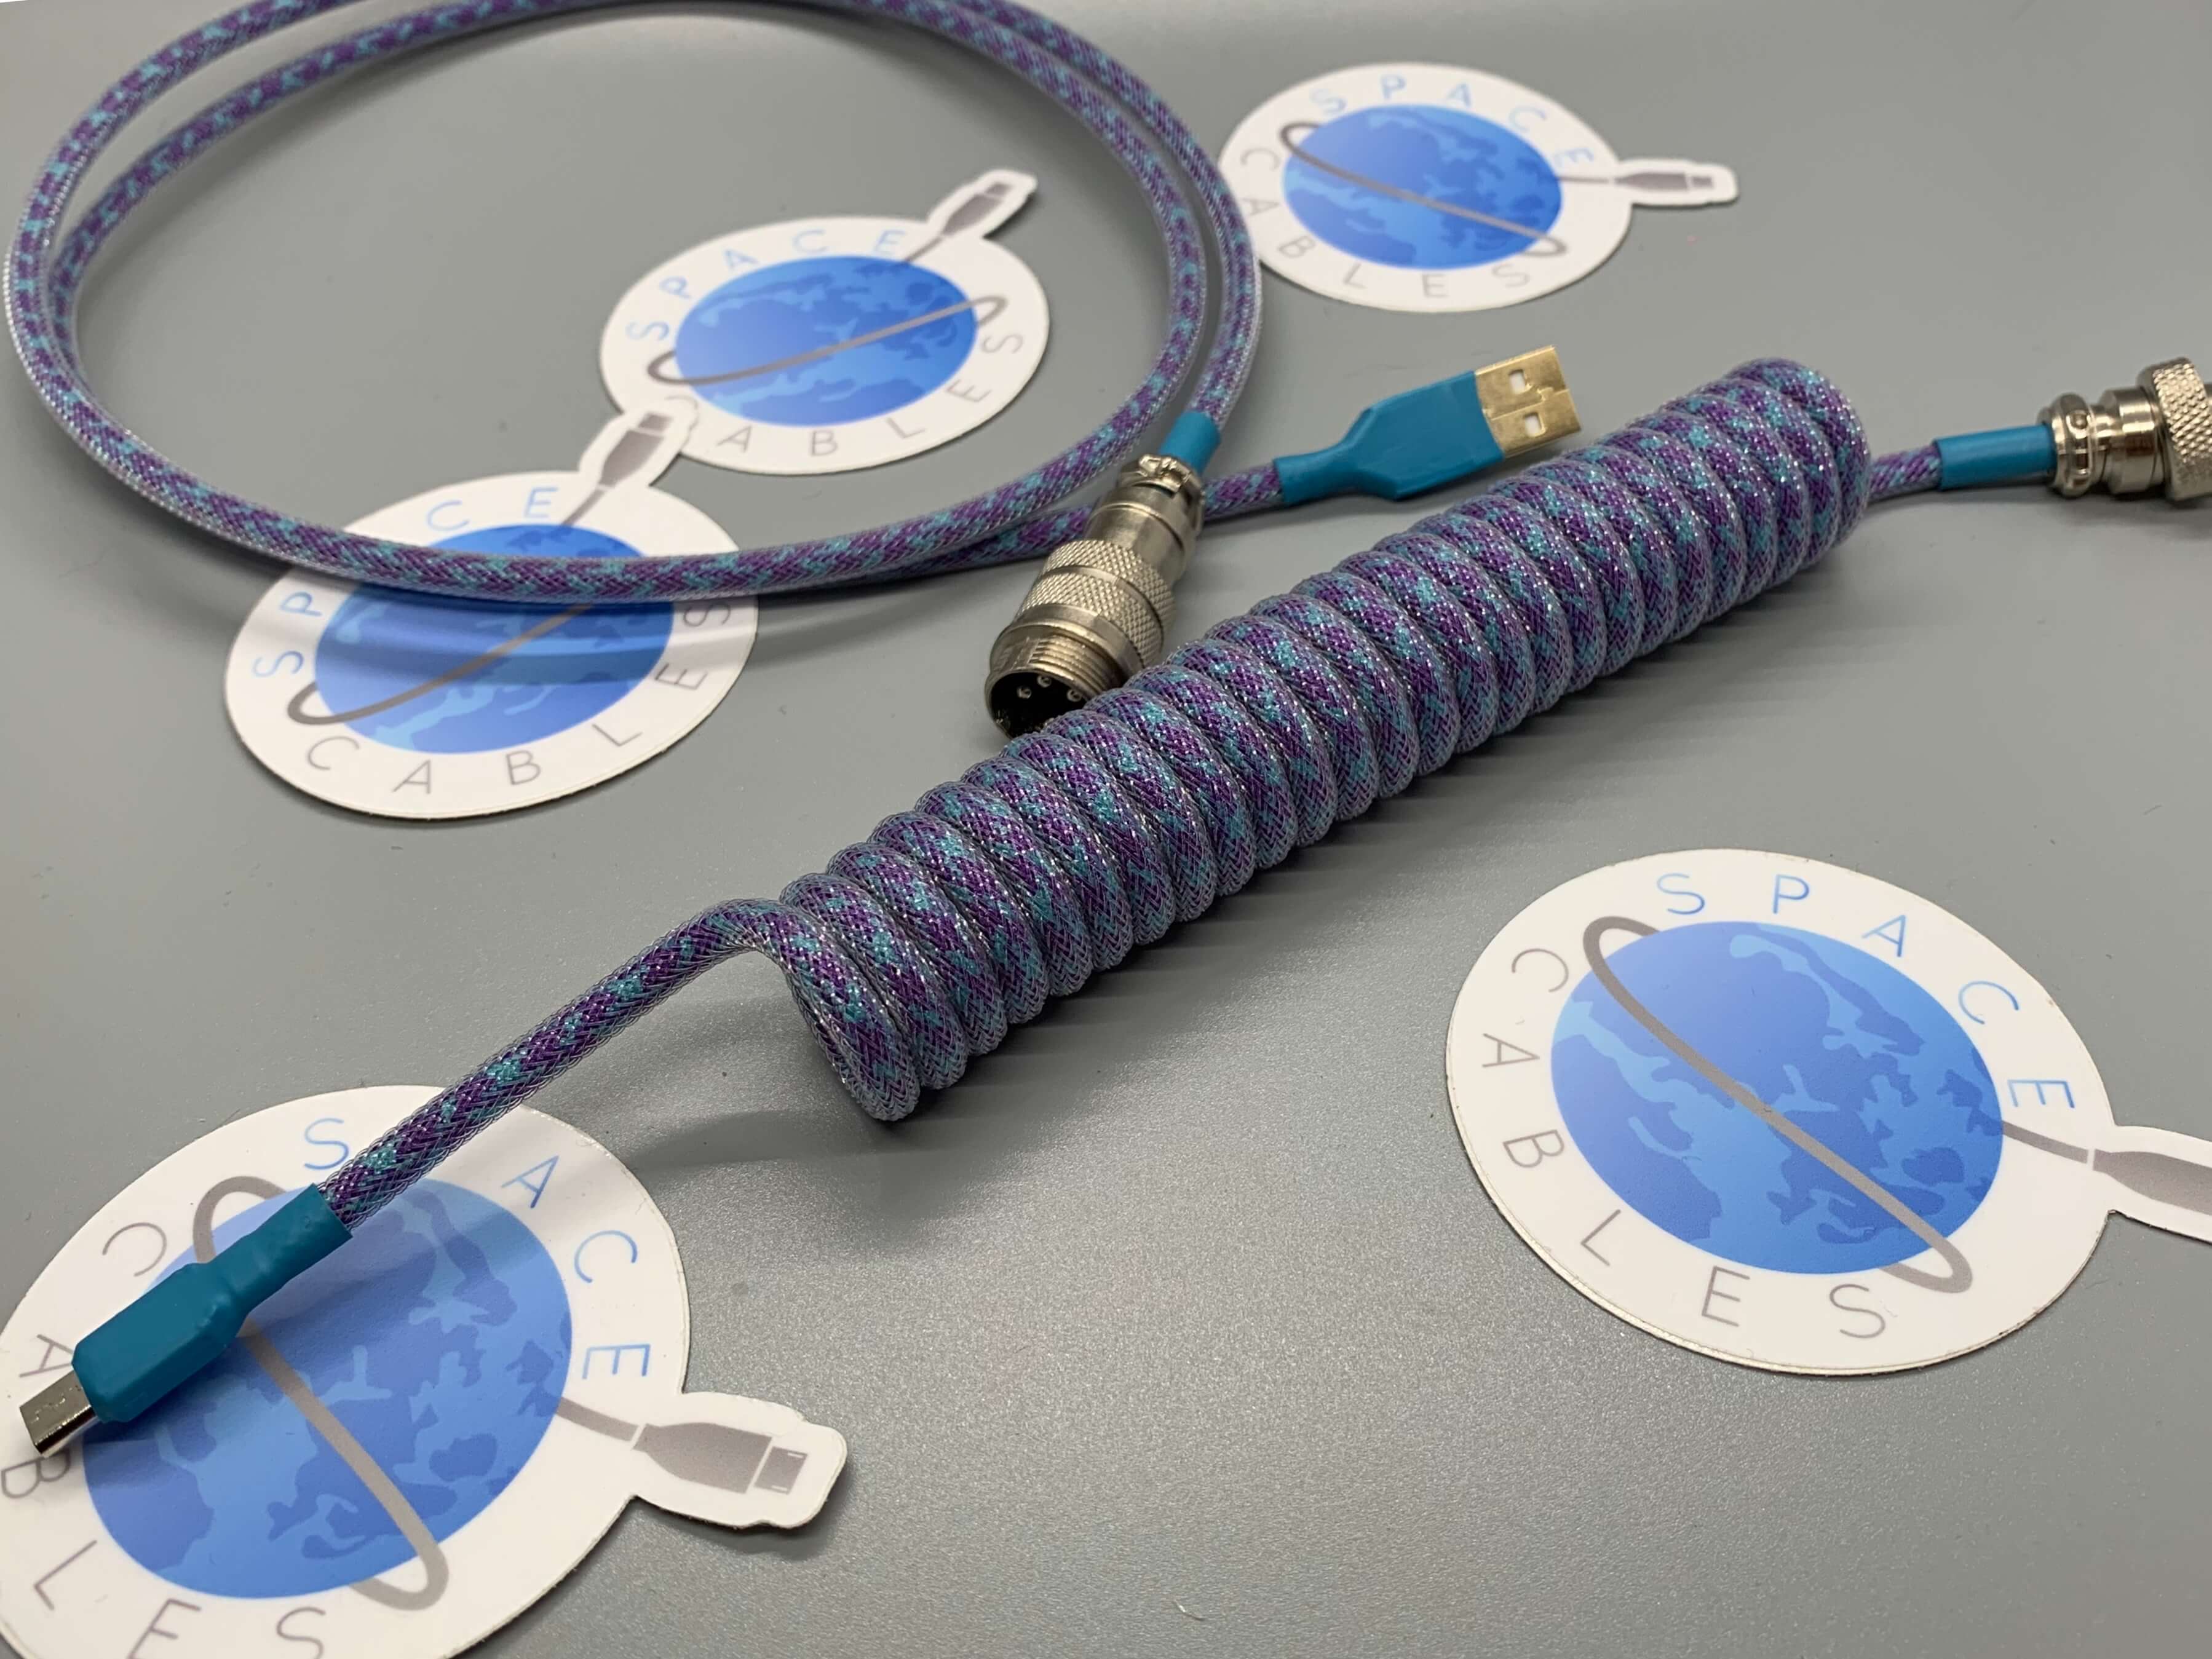 Build-Your-Own USB Cable – Space Cables